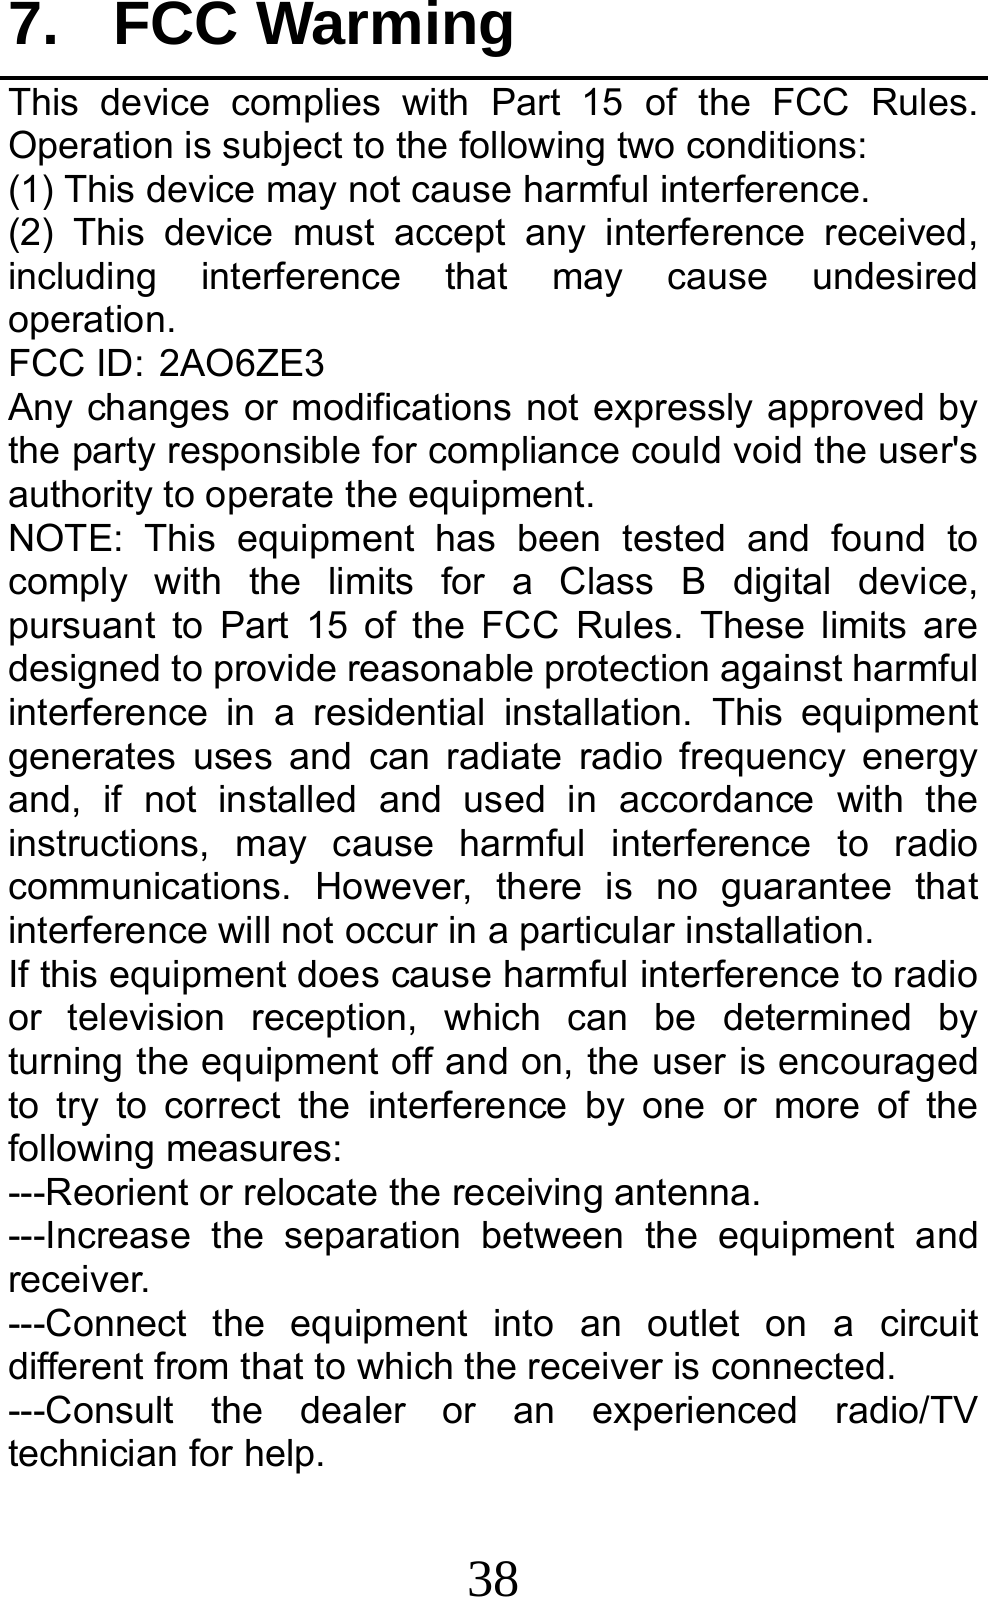 38 7. FCC Warming This device complies with Part 15 of the FCC Rules. Operation is subject to the following two conditions: (1) This device may not cause harmful interference.   (2) This device must accept any interference received, including interference that may cause undesired operation. FCC ID:2AO6ZE3 Any changes or modifications not expressly approved by the party responsible for compliance could void the user&apos;s authority to operate the equipment. NOTE: This equipment has been tested and found to comply with the limits for a Class B digital device, pursuant to Part 15 of the FCC Rules. These limits are designed to provide reasonable protection against harmful interference in a residential installation. This equipment generates uses and can radiate radio frequency energy and, if not installed and used in accordance with the instructions, may cause harmful interference to radio communications. However, there is no guarantee that interference will not occur in a particular installation. If this equipment does cause harmful interference to radio or television reception, which can be determined by turning the equipment off and on, the user is encouraged to try to correct the interference by one or more of the following measures: ---Reorient or relocate the receiving antenna. ---Increase the separation between the equipment and receiver. ---Connect the equipment into an outlet on a circuit different from that to which the receiver is connected. ---Consult the dealer or an experienced radio/TV technician for help. 